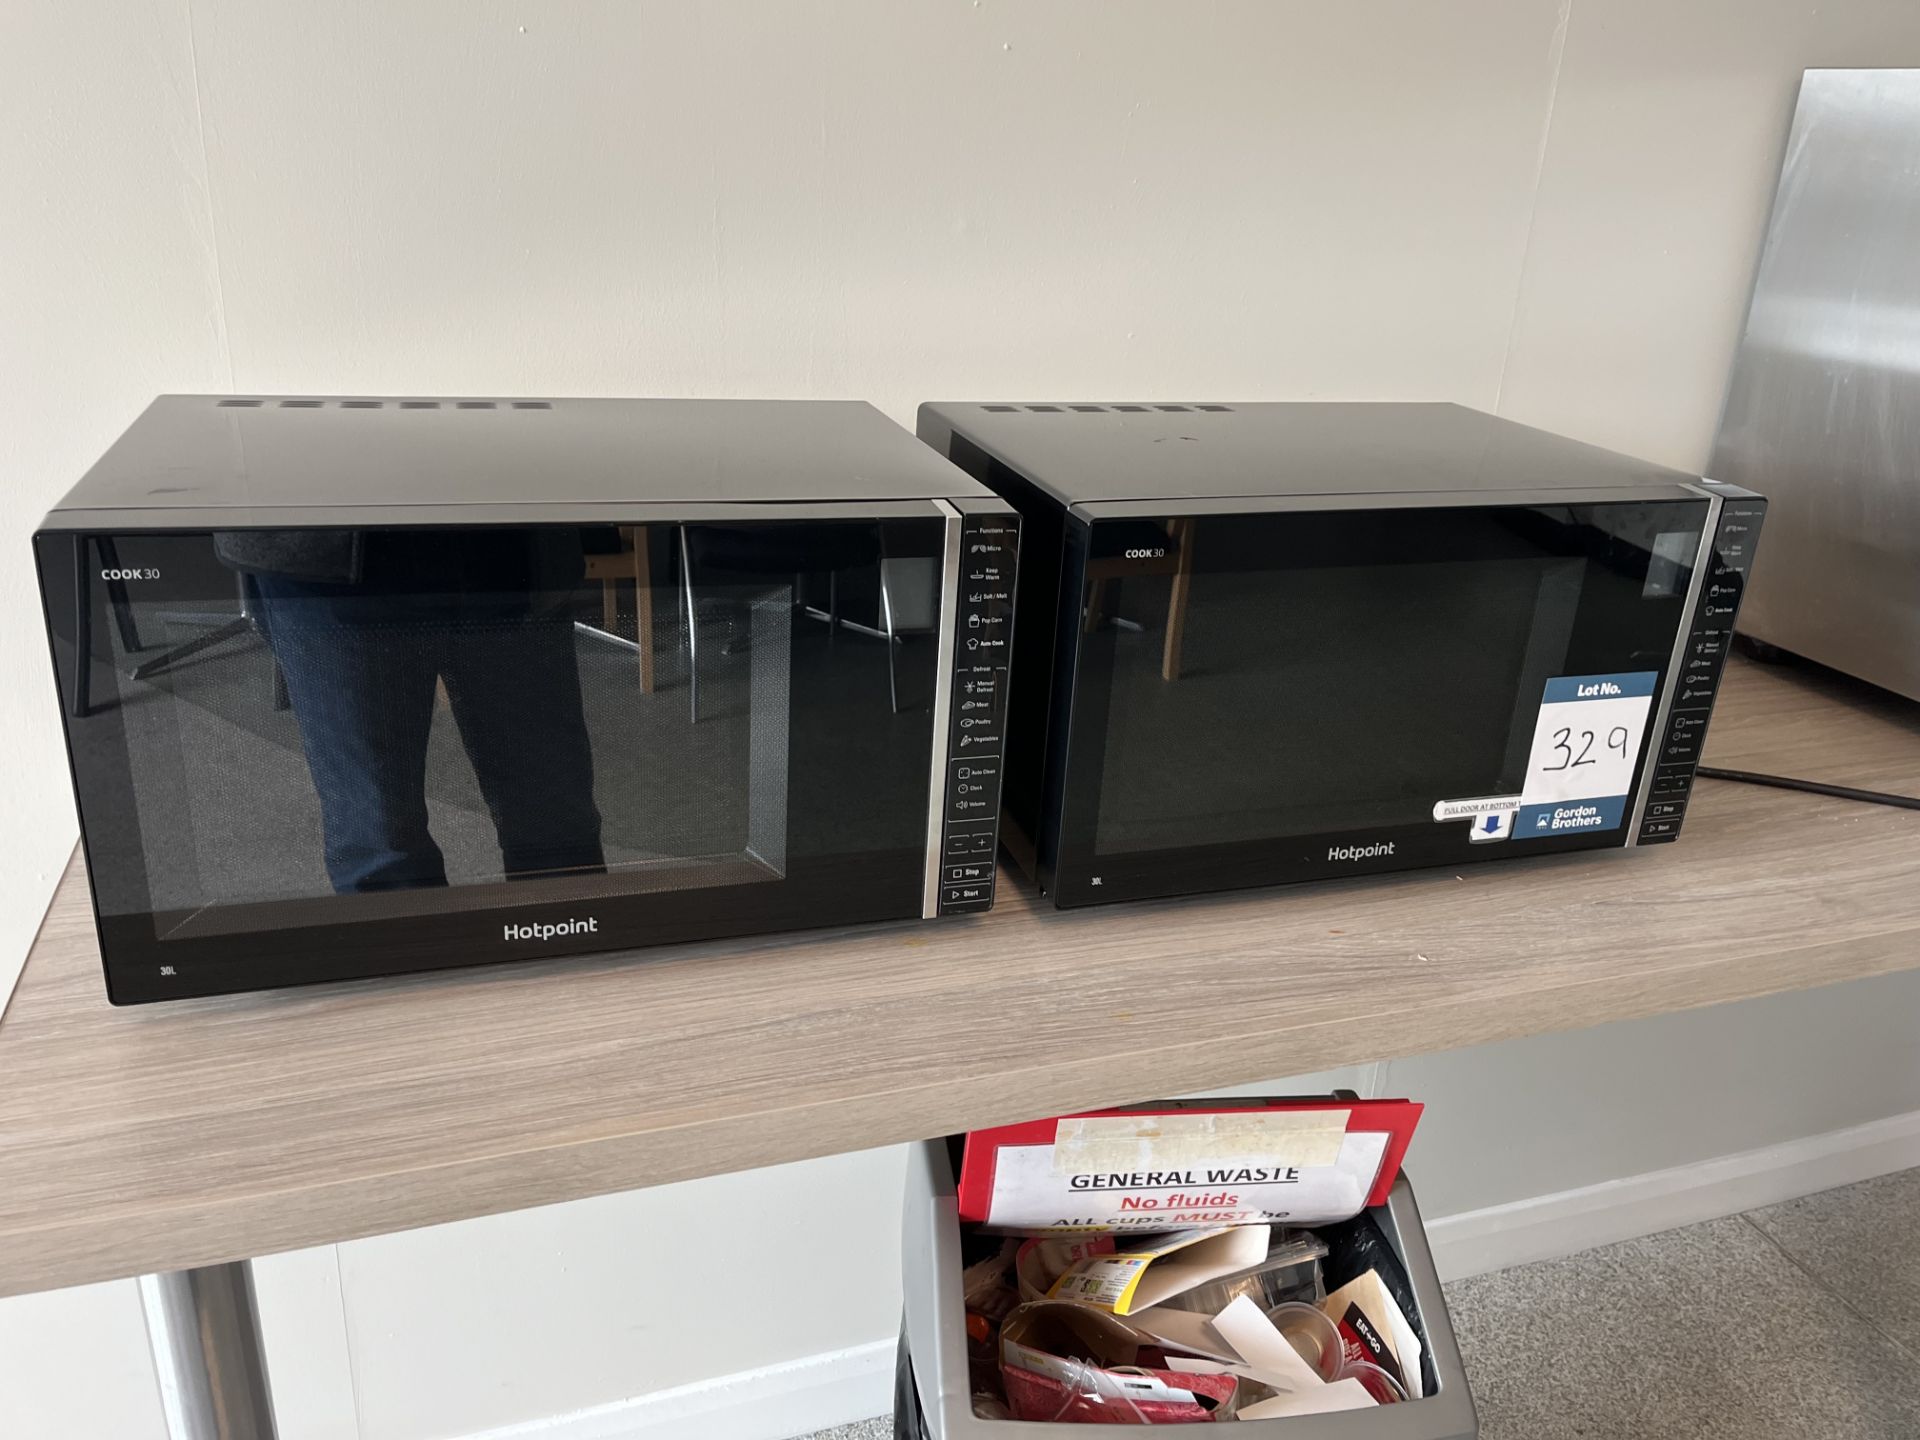 2x (no.) Hotpoint, Cook 30 microwave ovens